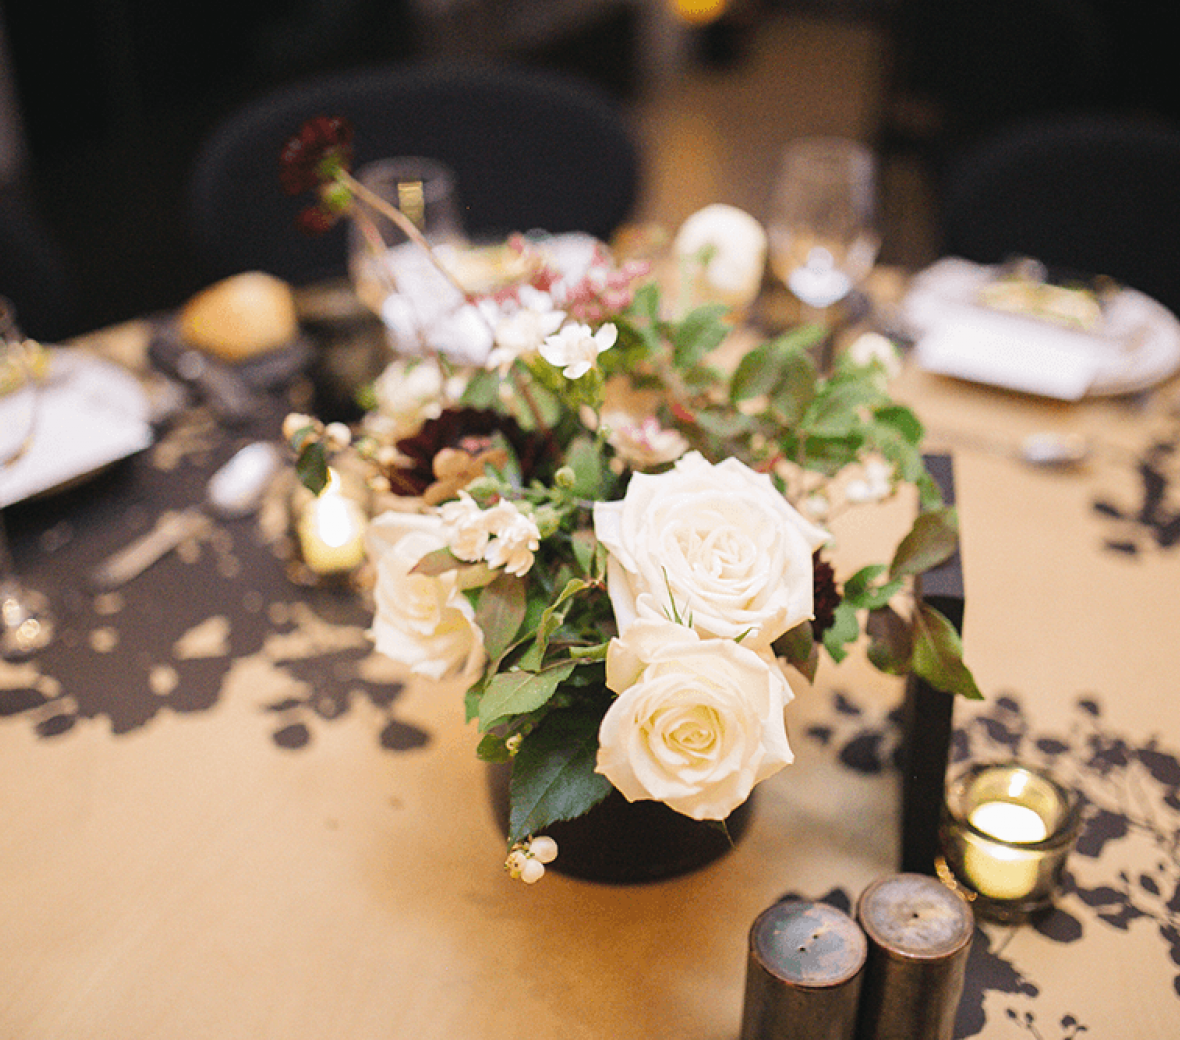 A decorative bouquet of wedding flowers on a round wooden guest table.